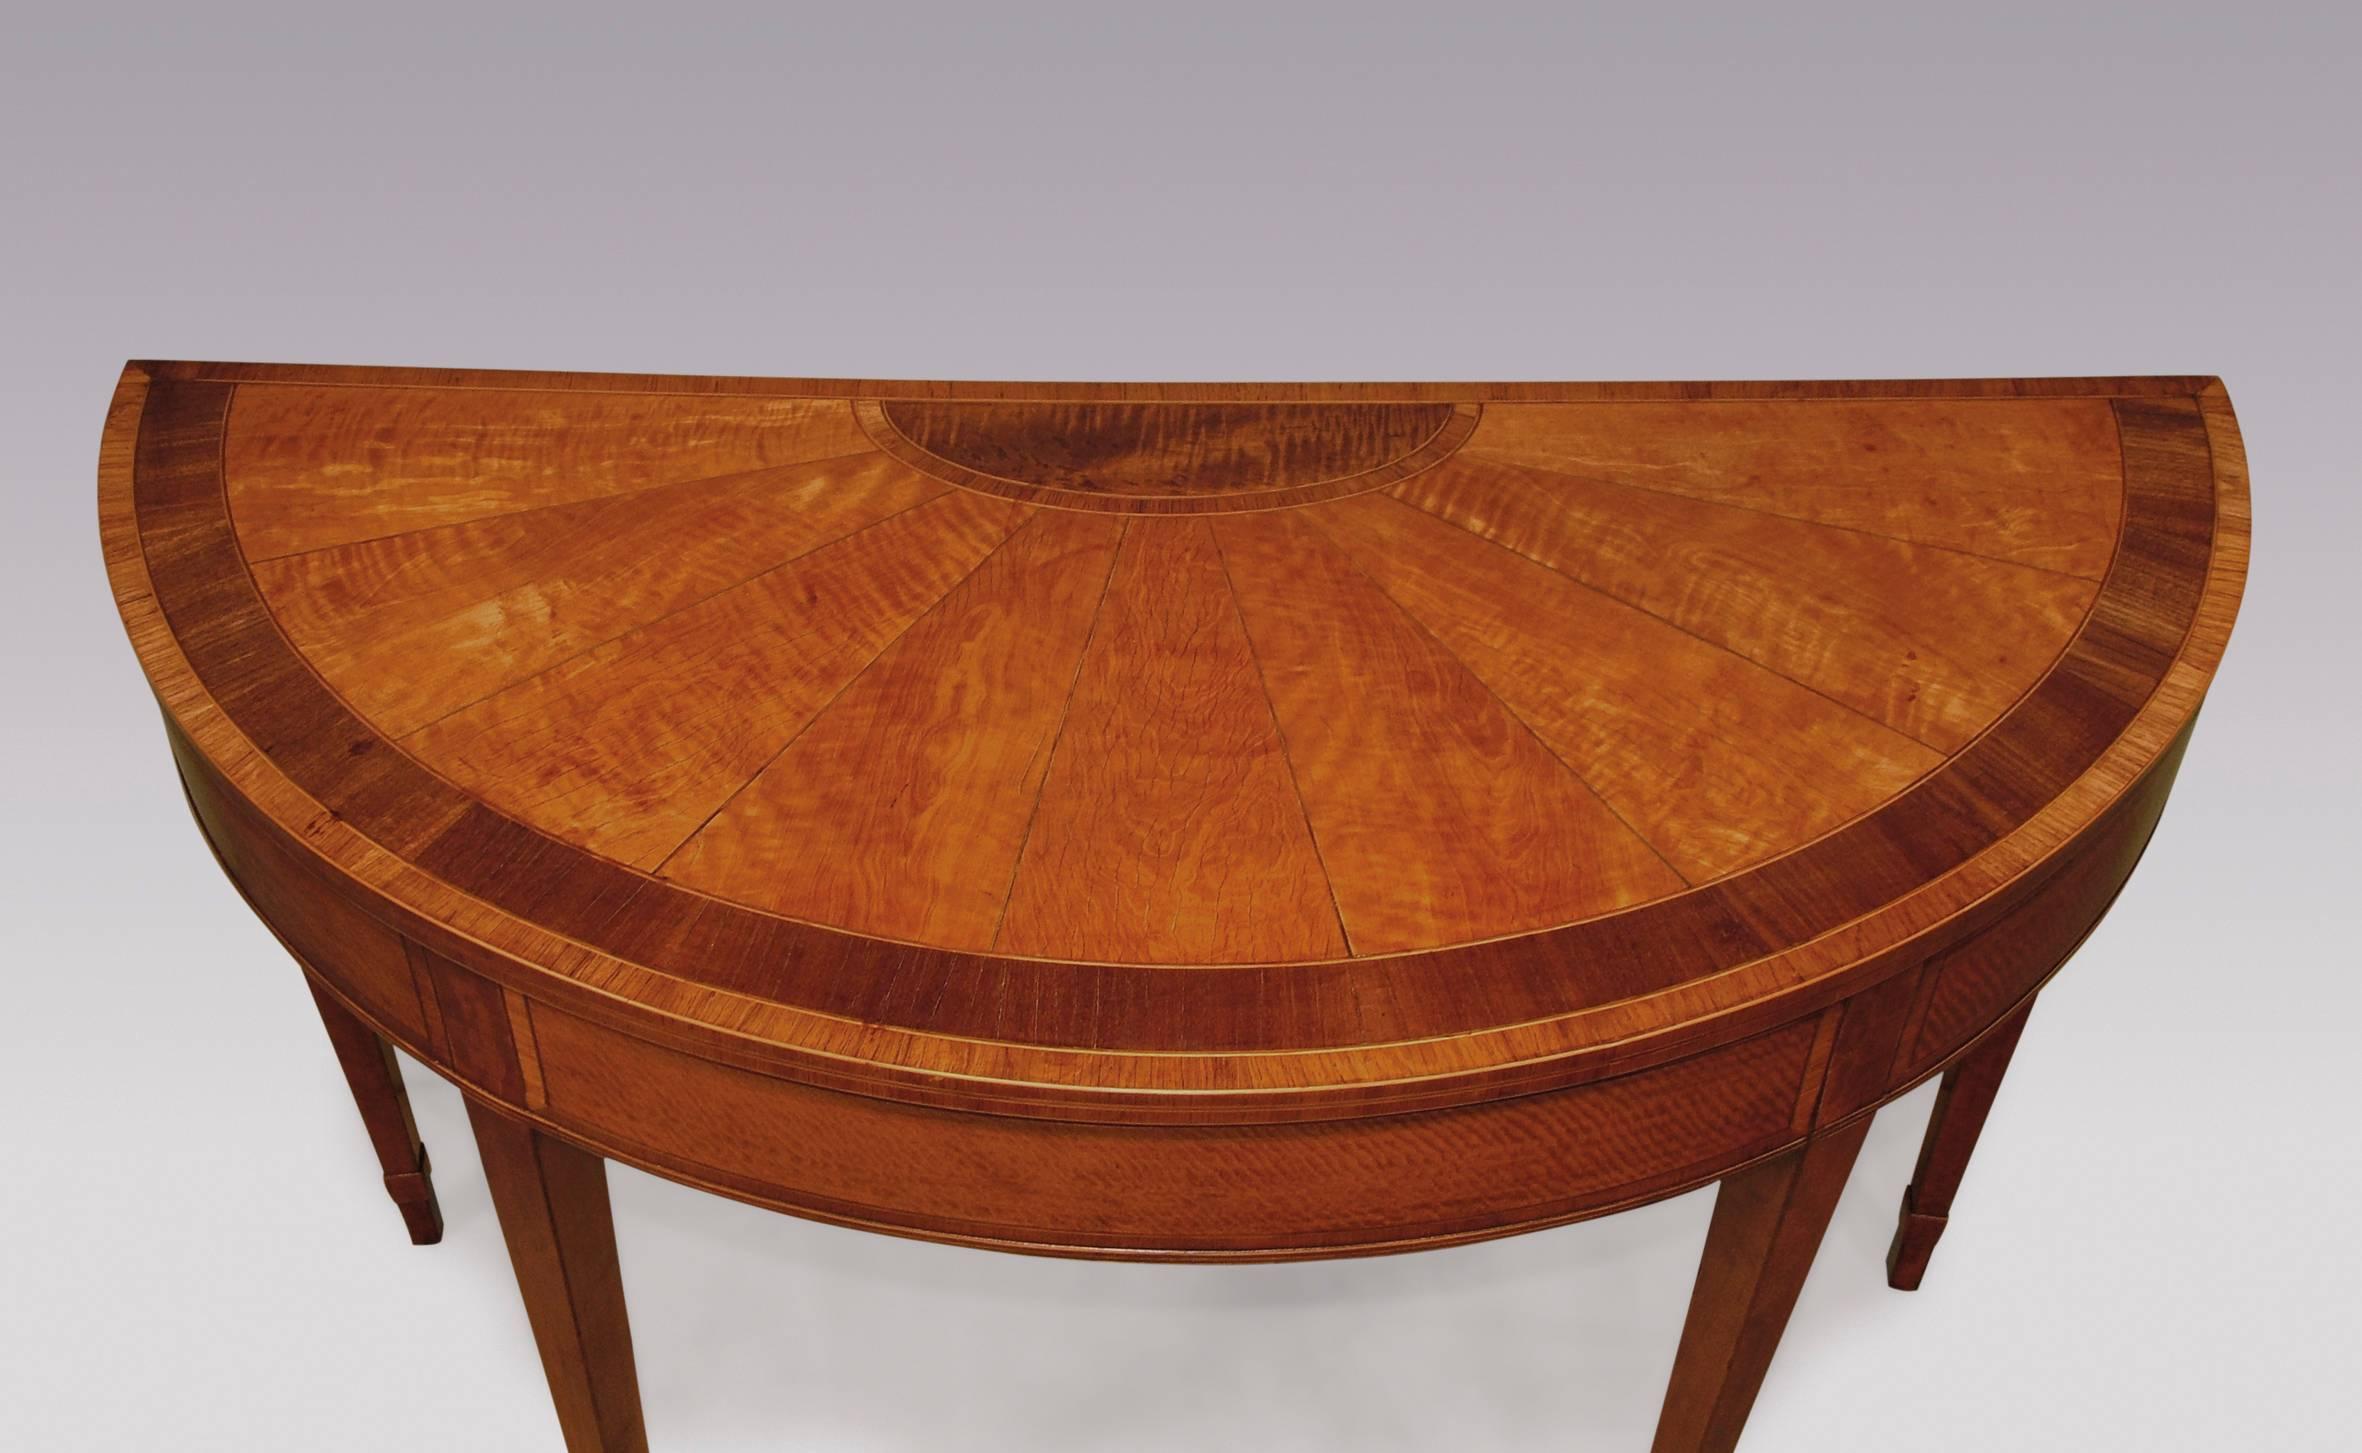 A late 18th century Sheraton period demilune satinwood card table, boxwood and ebony line inlaid and tulipwood crossbanded throughout, having rosewood crossbanded segmented top with central panel to the rear, above panelled frieze, supported on